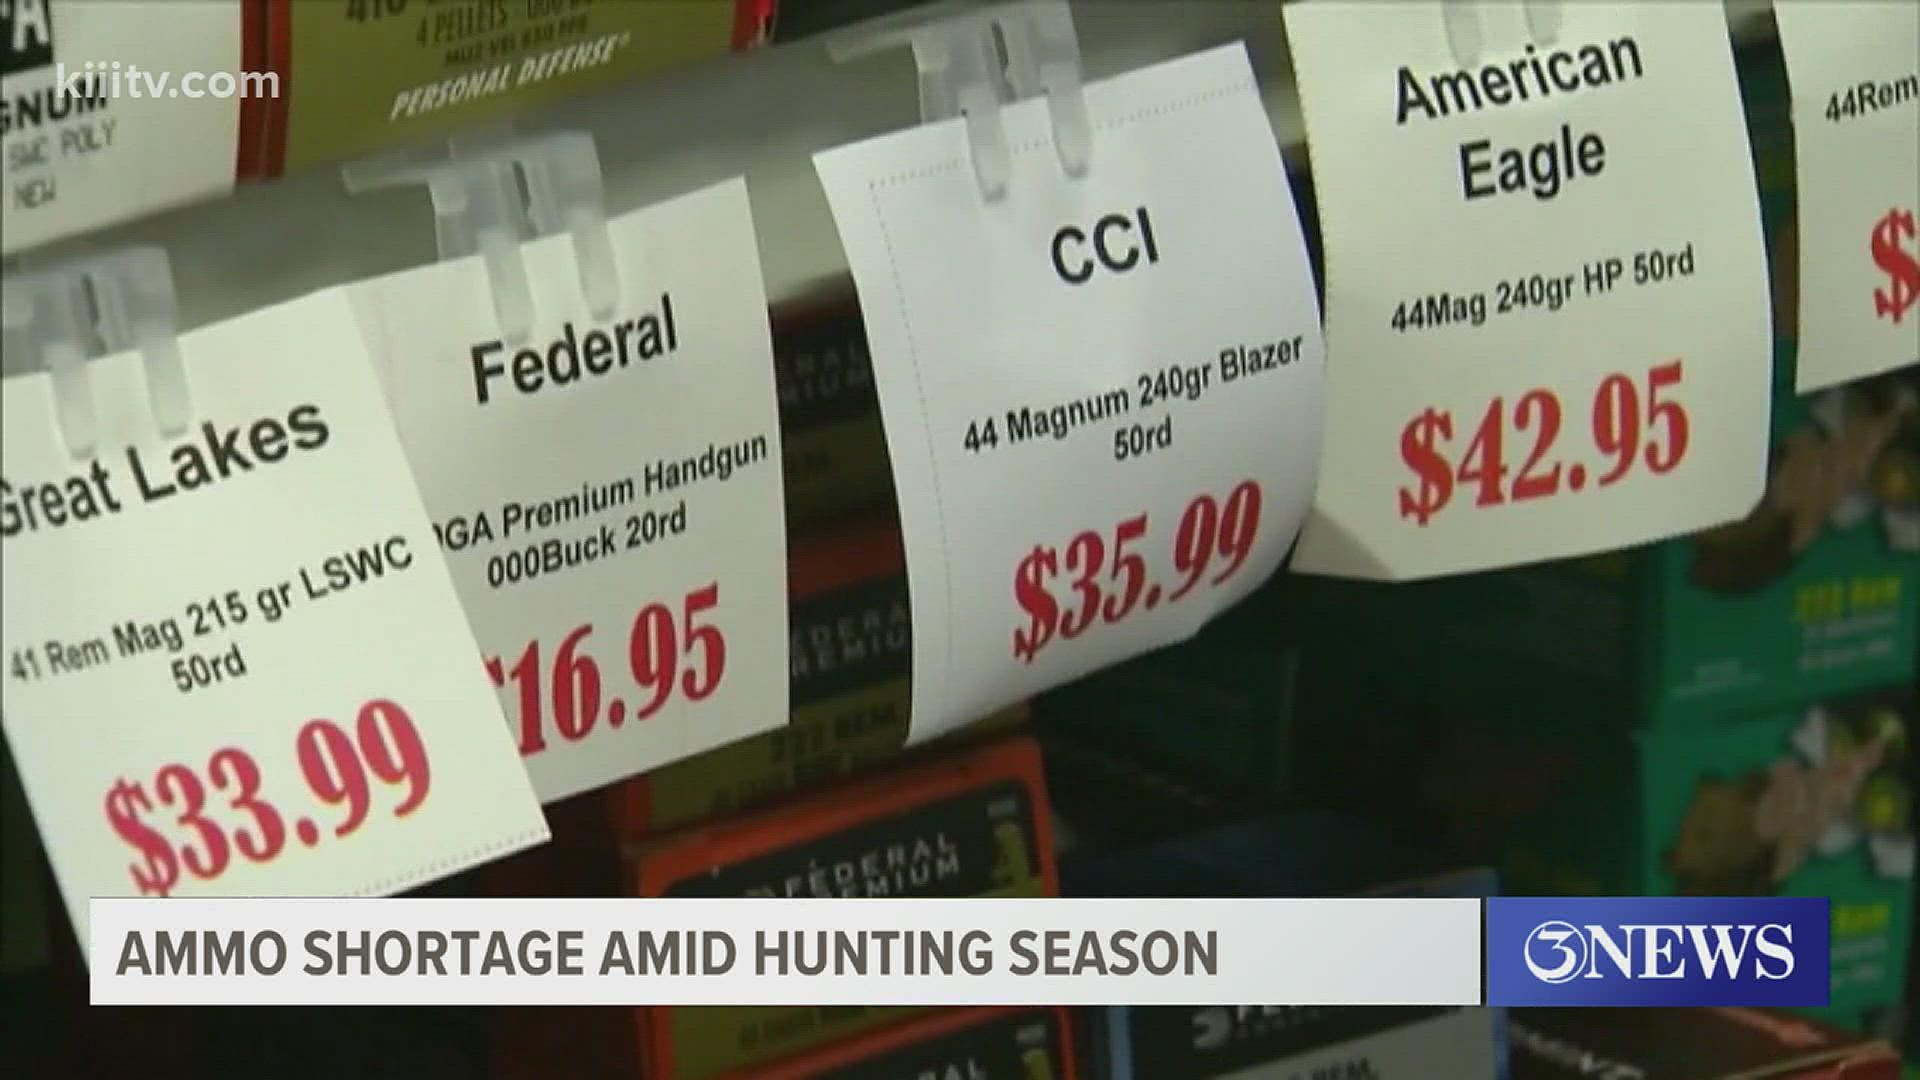 Texas Game Warden Lerrin Johnson, said the ammunition shortage hasn’t slowed hunters down, but warns they may have to adapt.